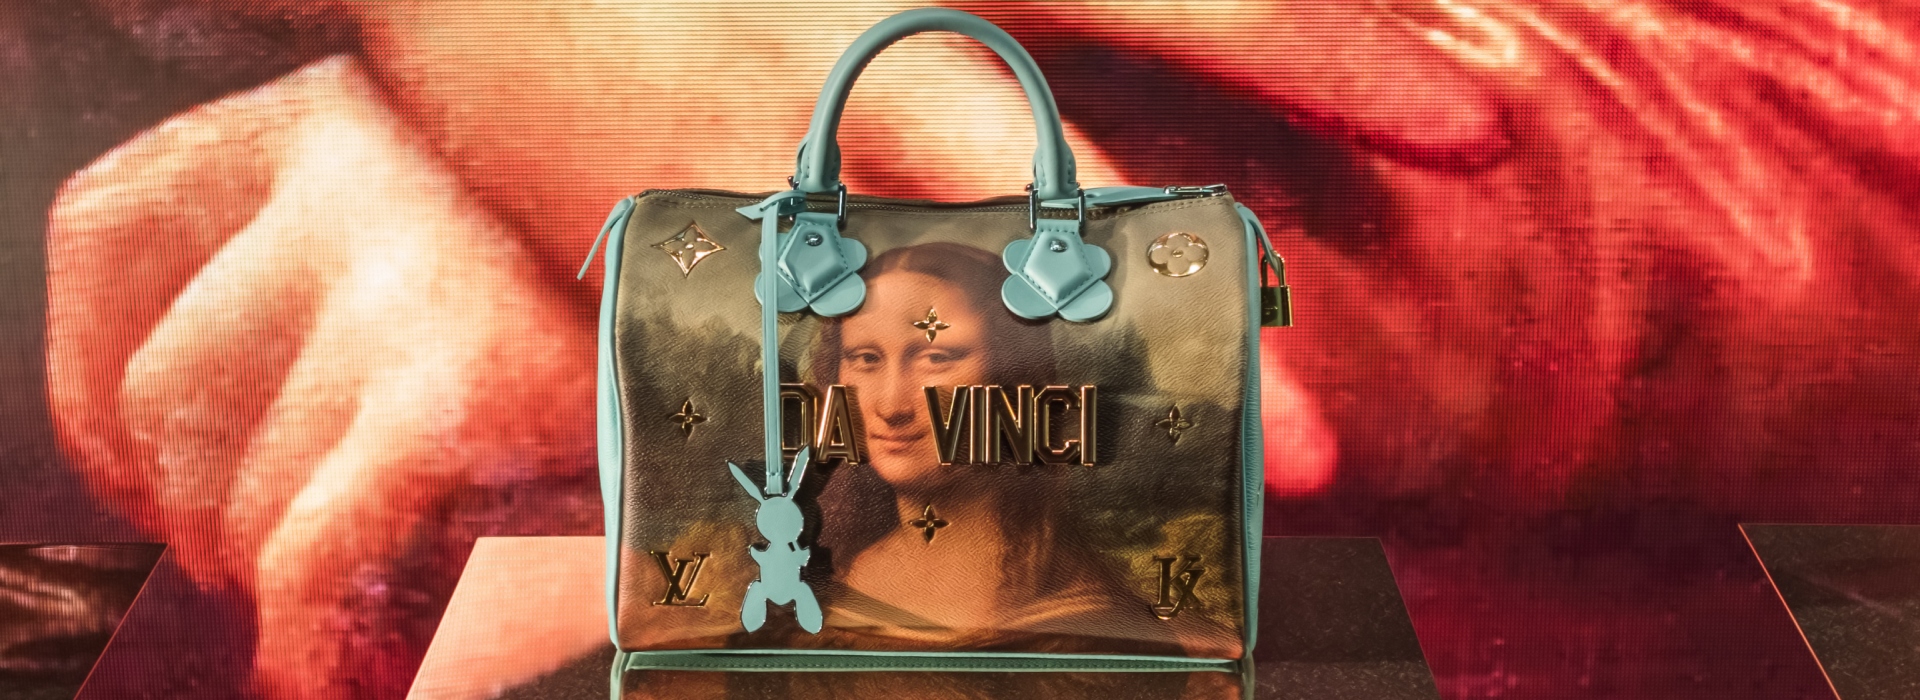 Louis Vuitton is the most sought-after luxury brand of the year